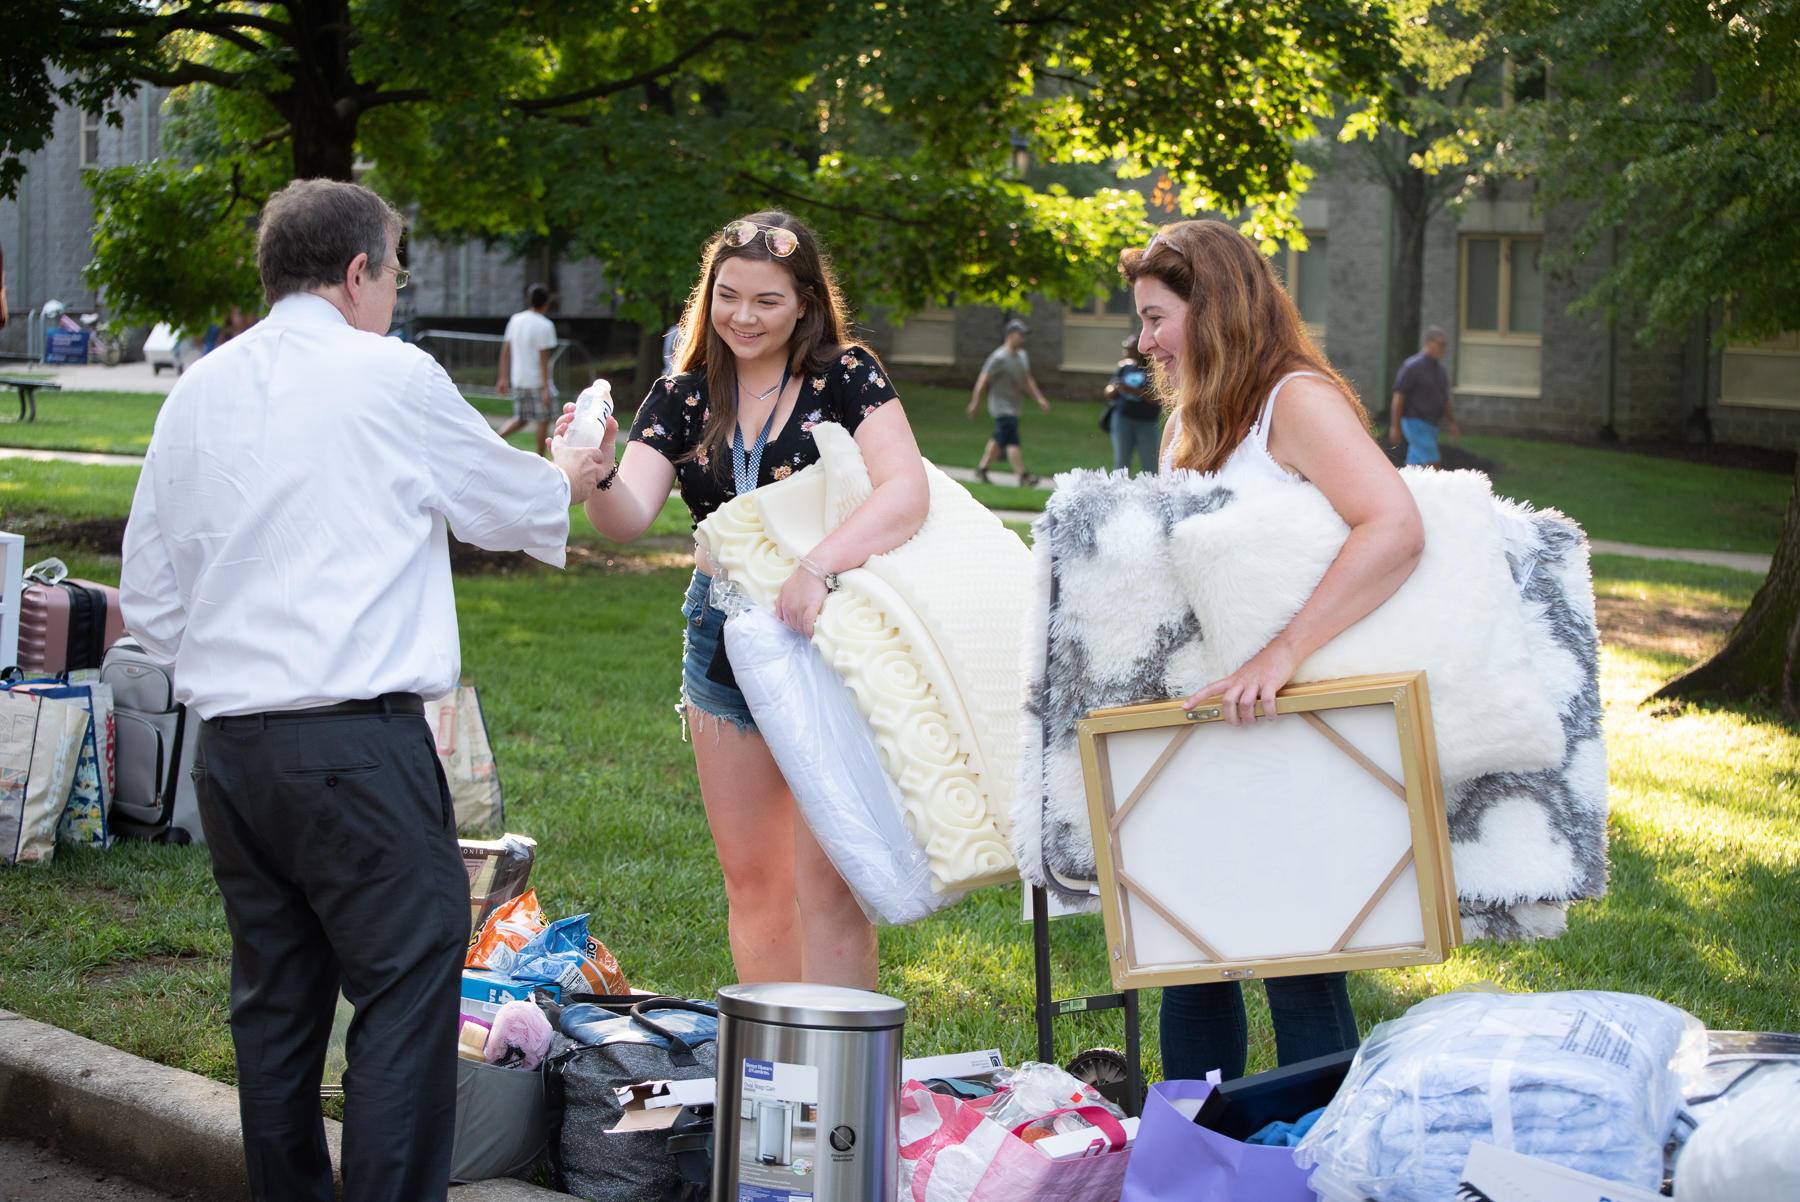 Scenes from Convocation and move-in day